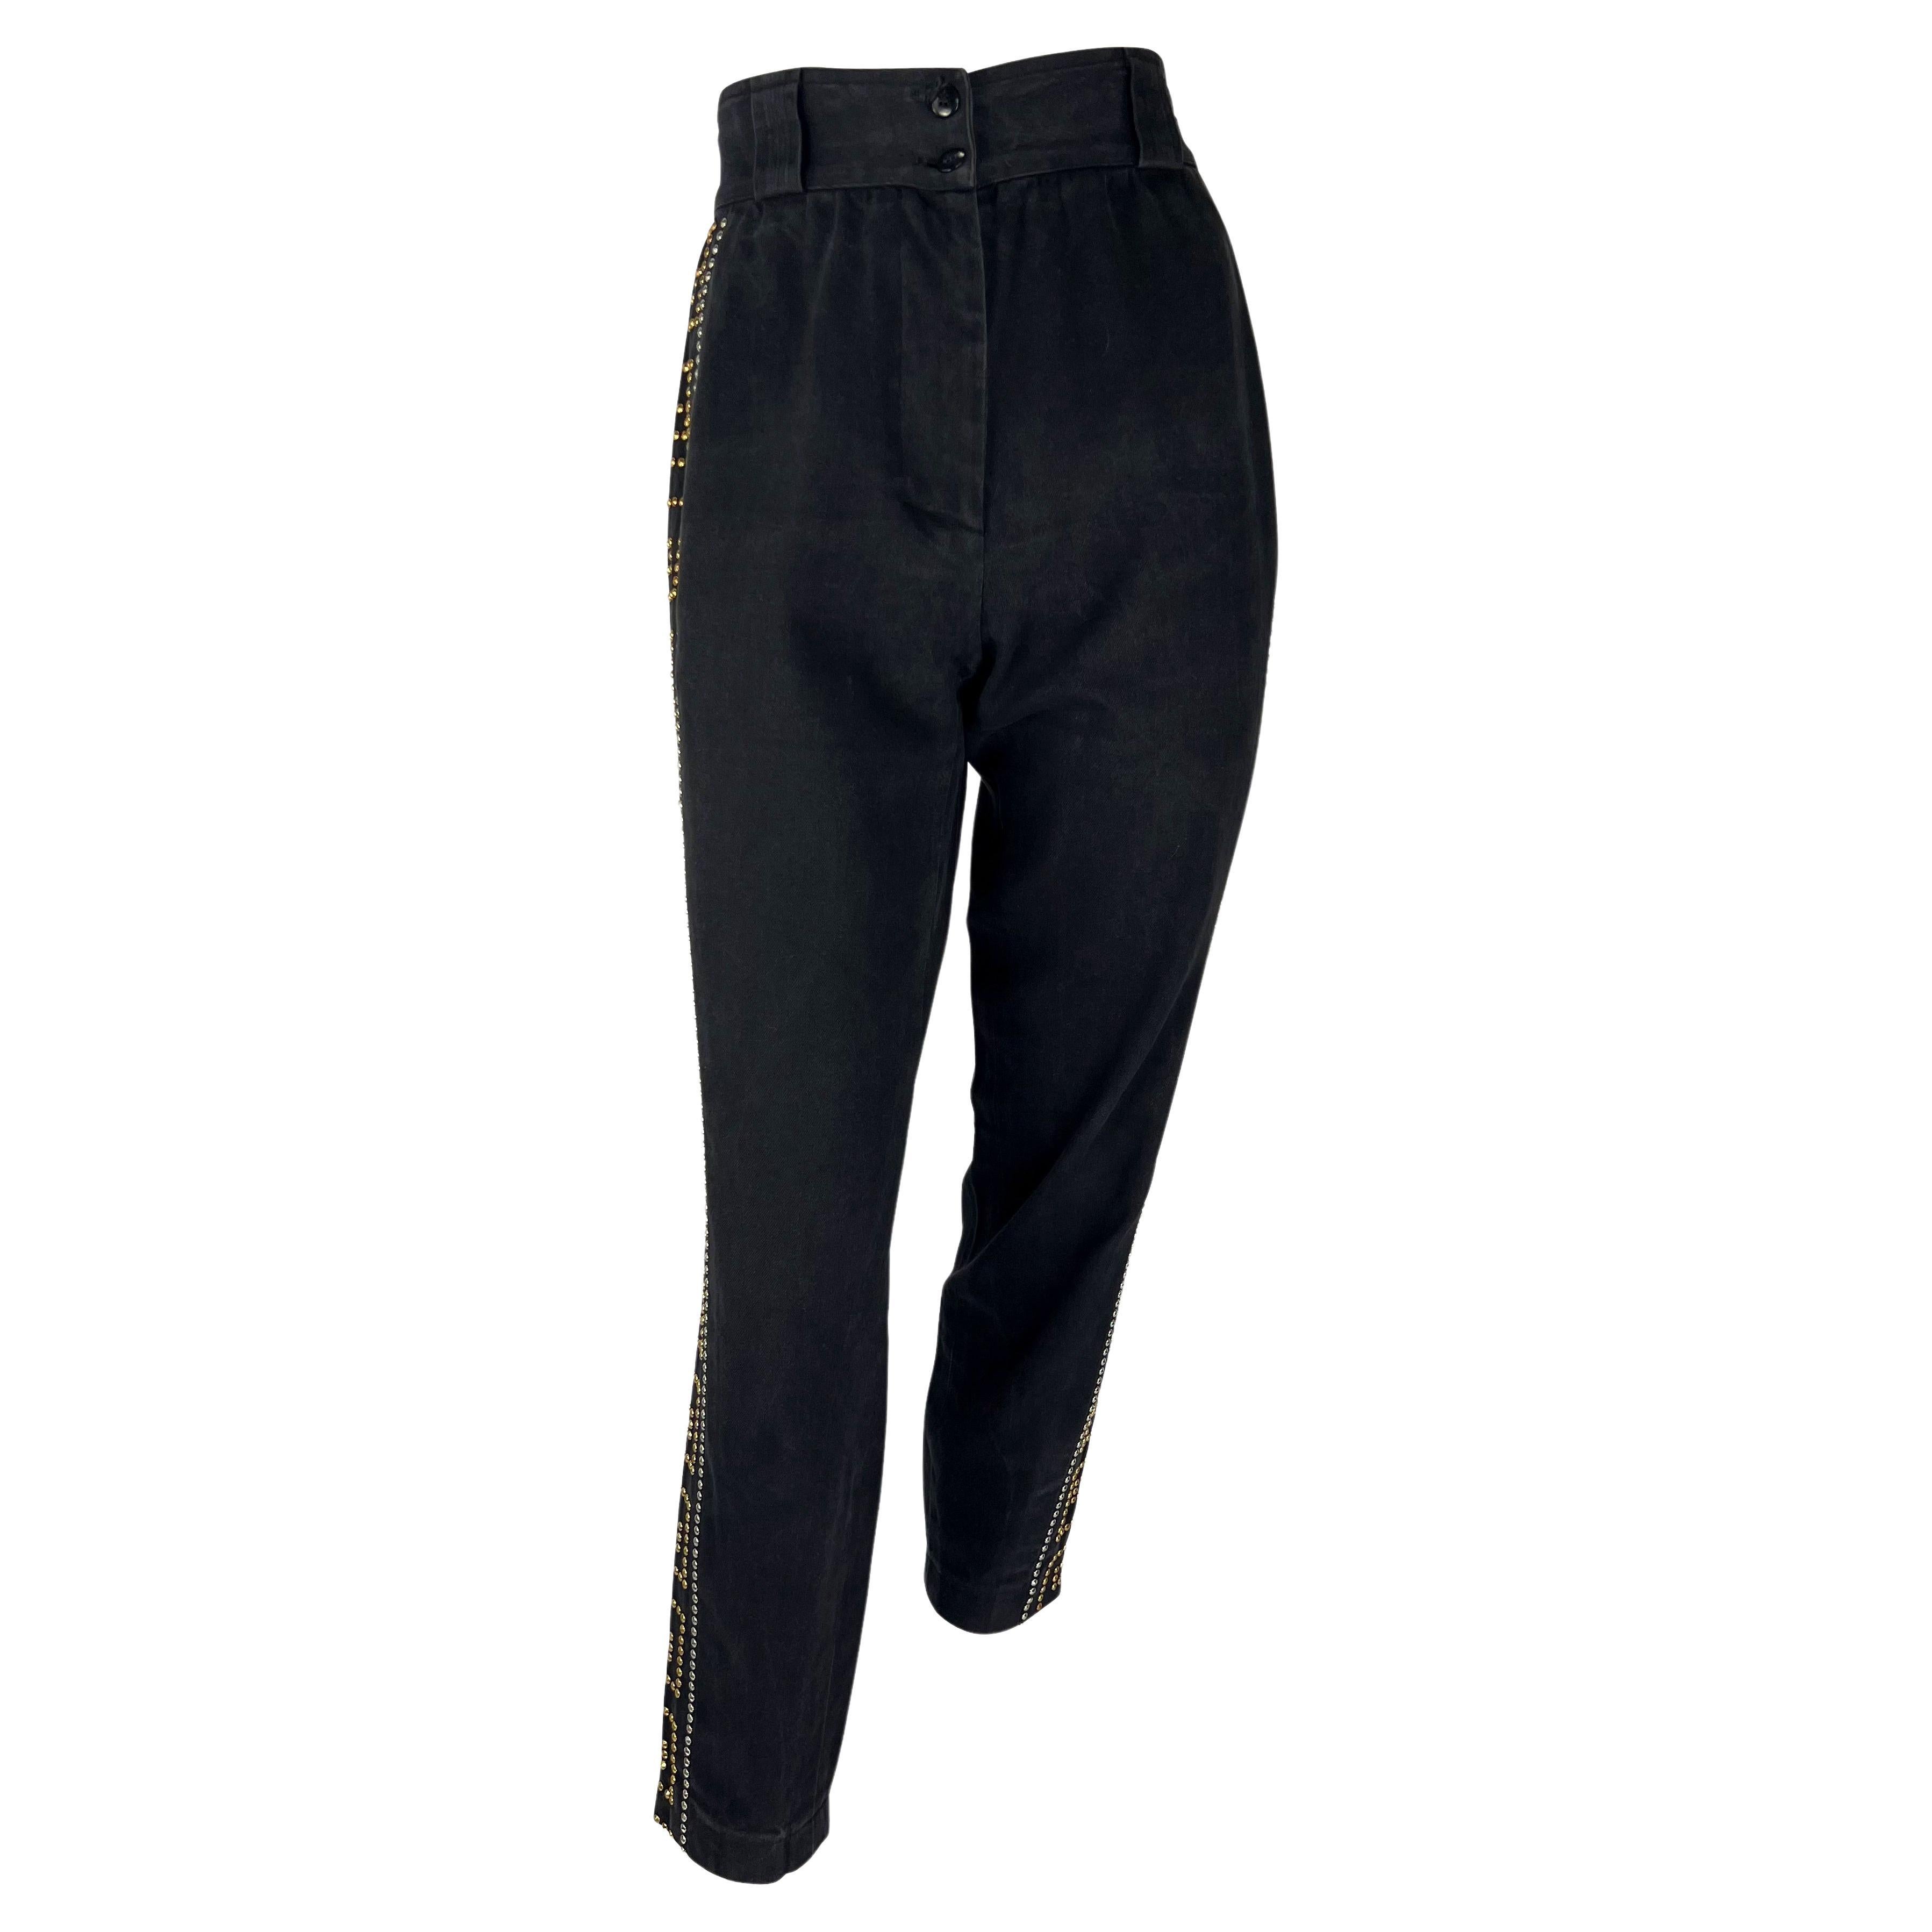 Women's F/W 1992 Gianni Versace Couture Greek Key Studded Gold Silver Black Jeans